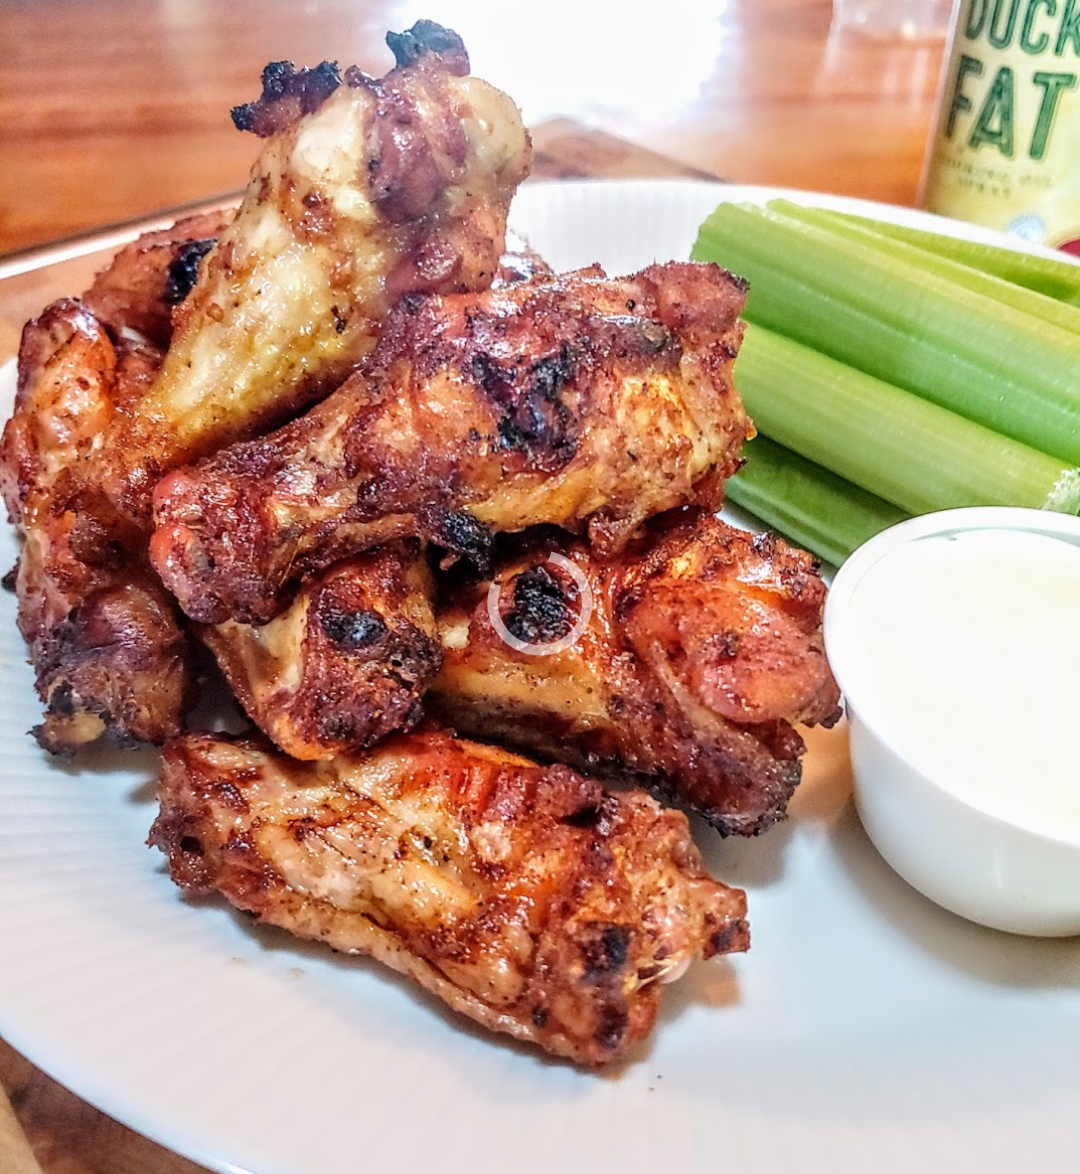 Grilled Chicken wings with celery and blue cheese dip